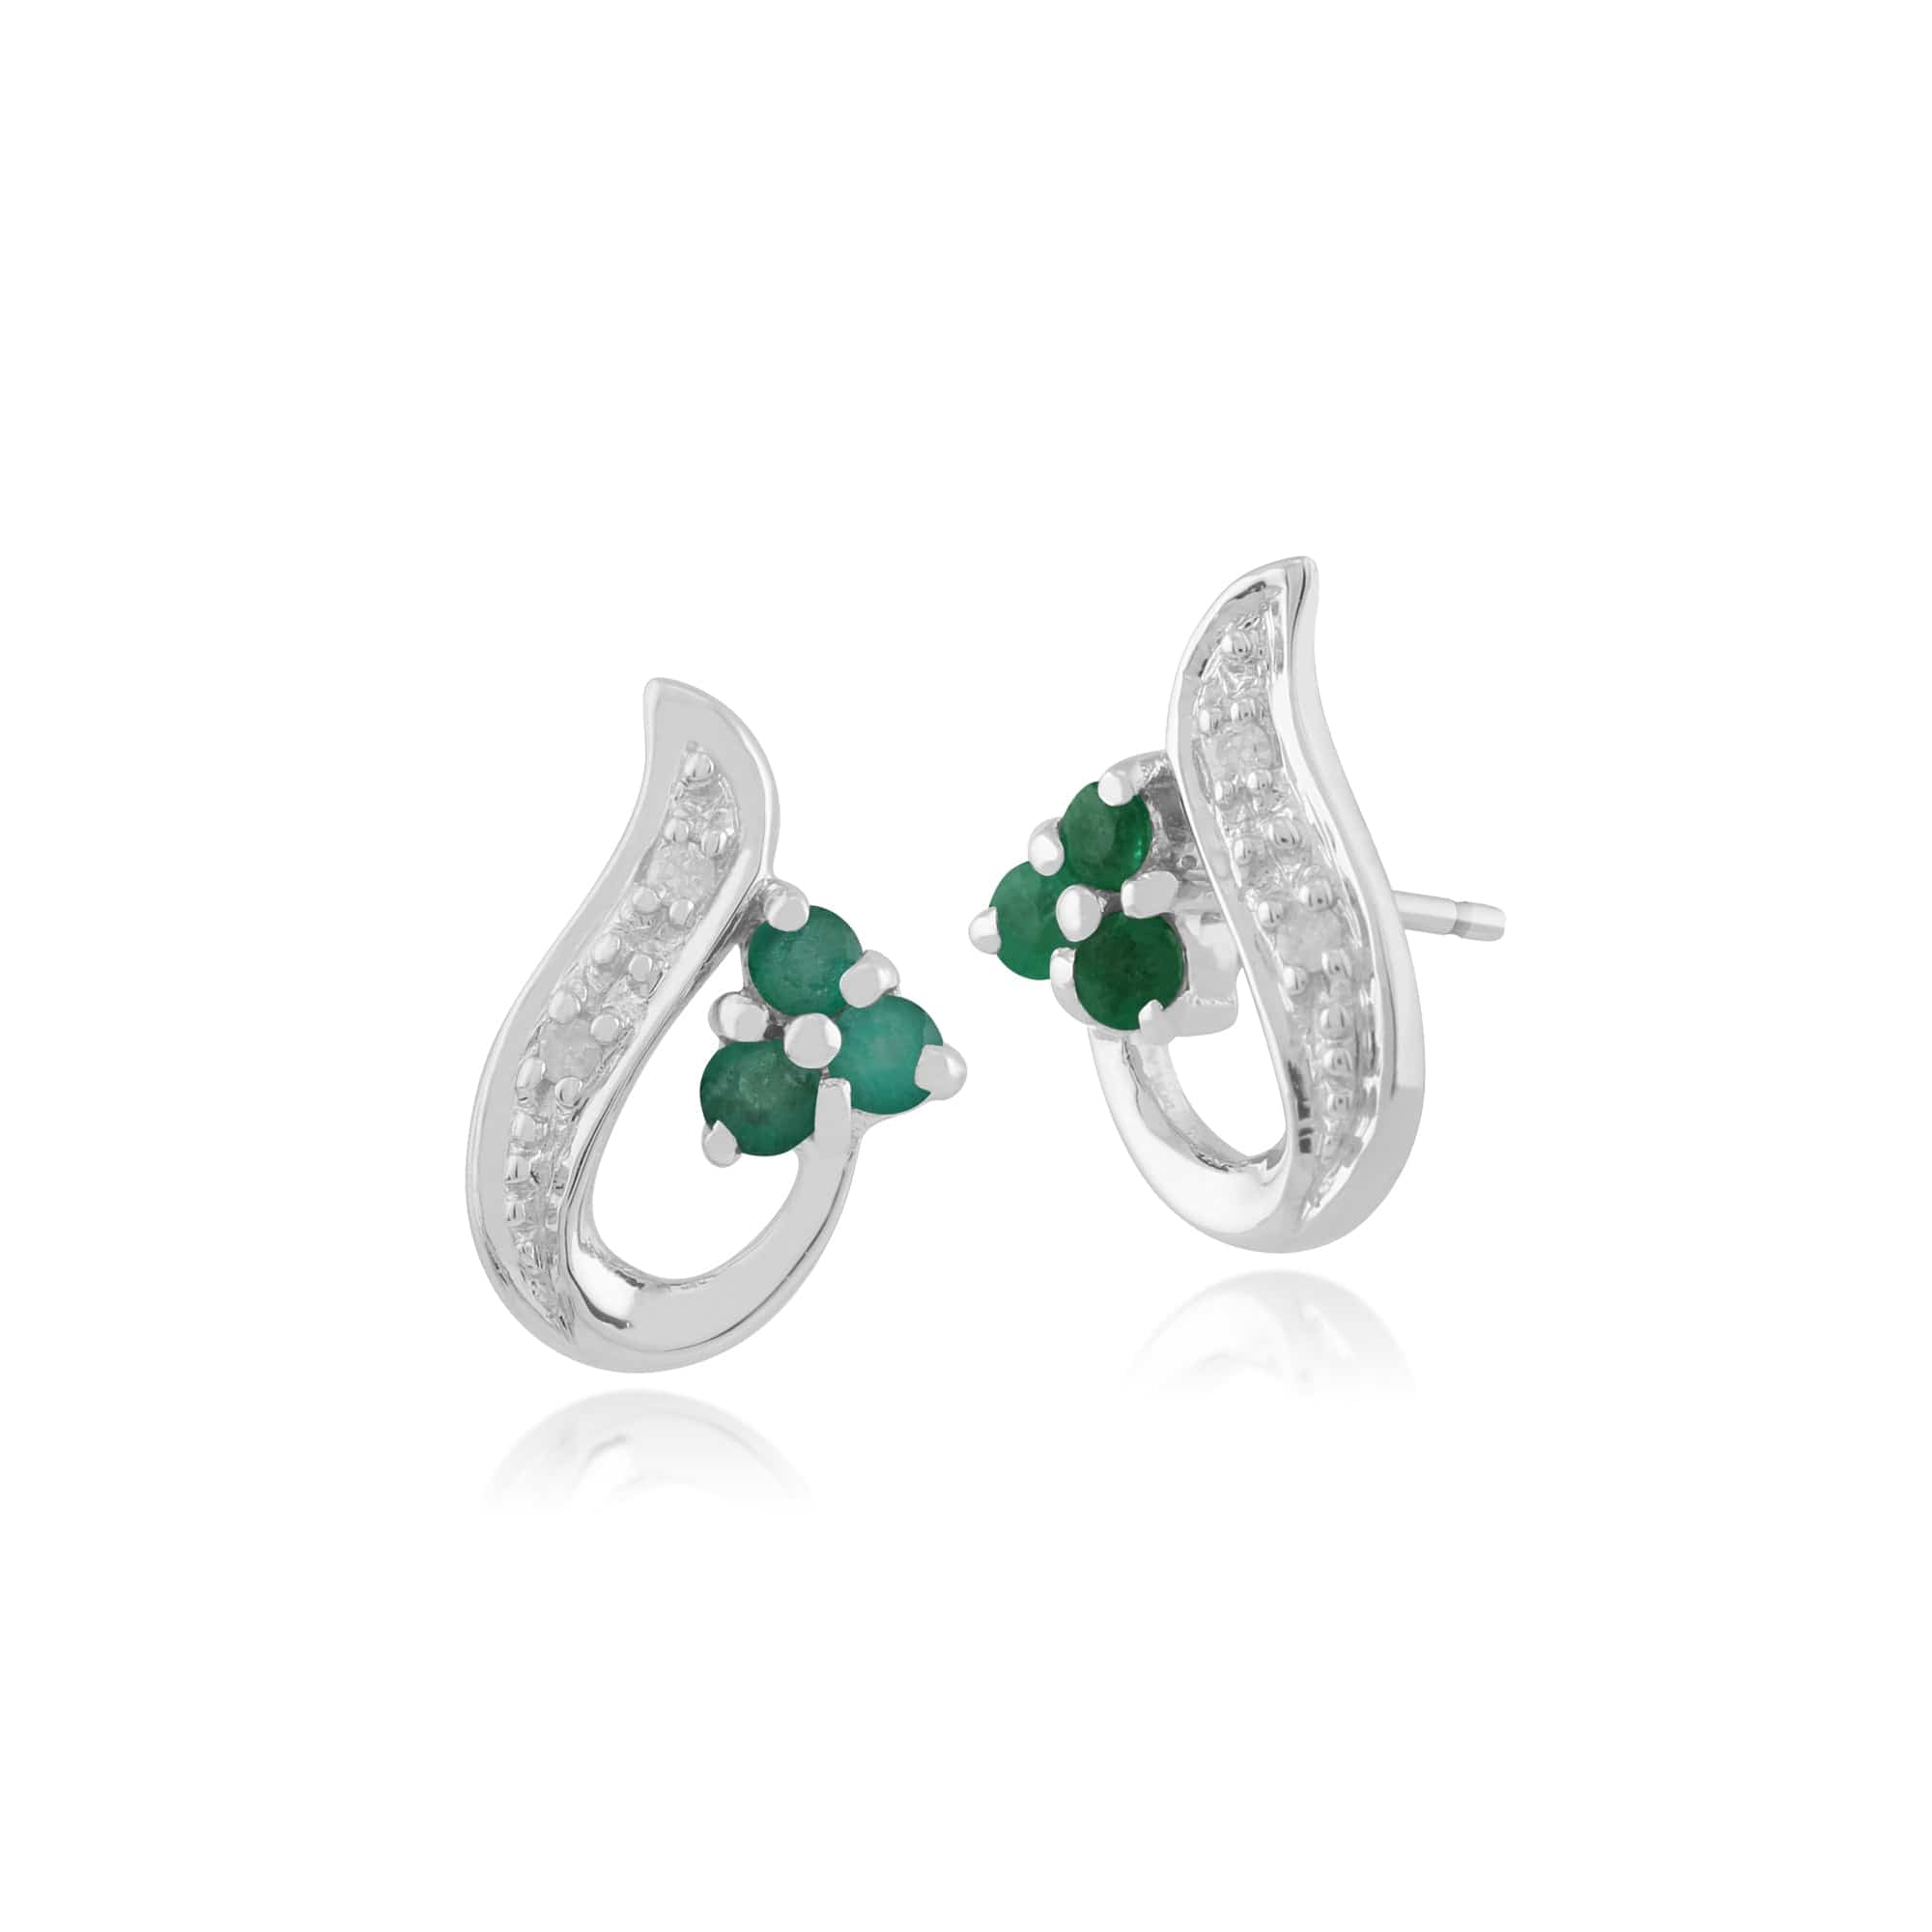 9ct White Gold 0.12ct Natural Emerald & 1.6pt Diamond Classic Stud Earrings Image